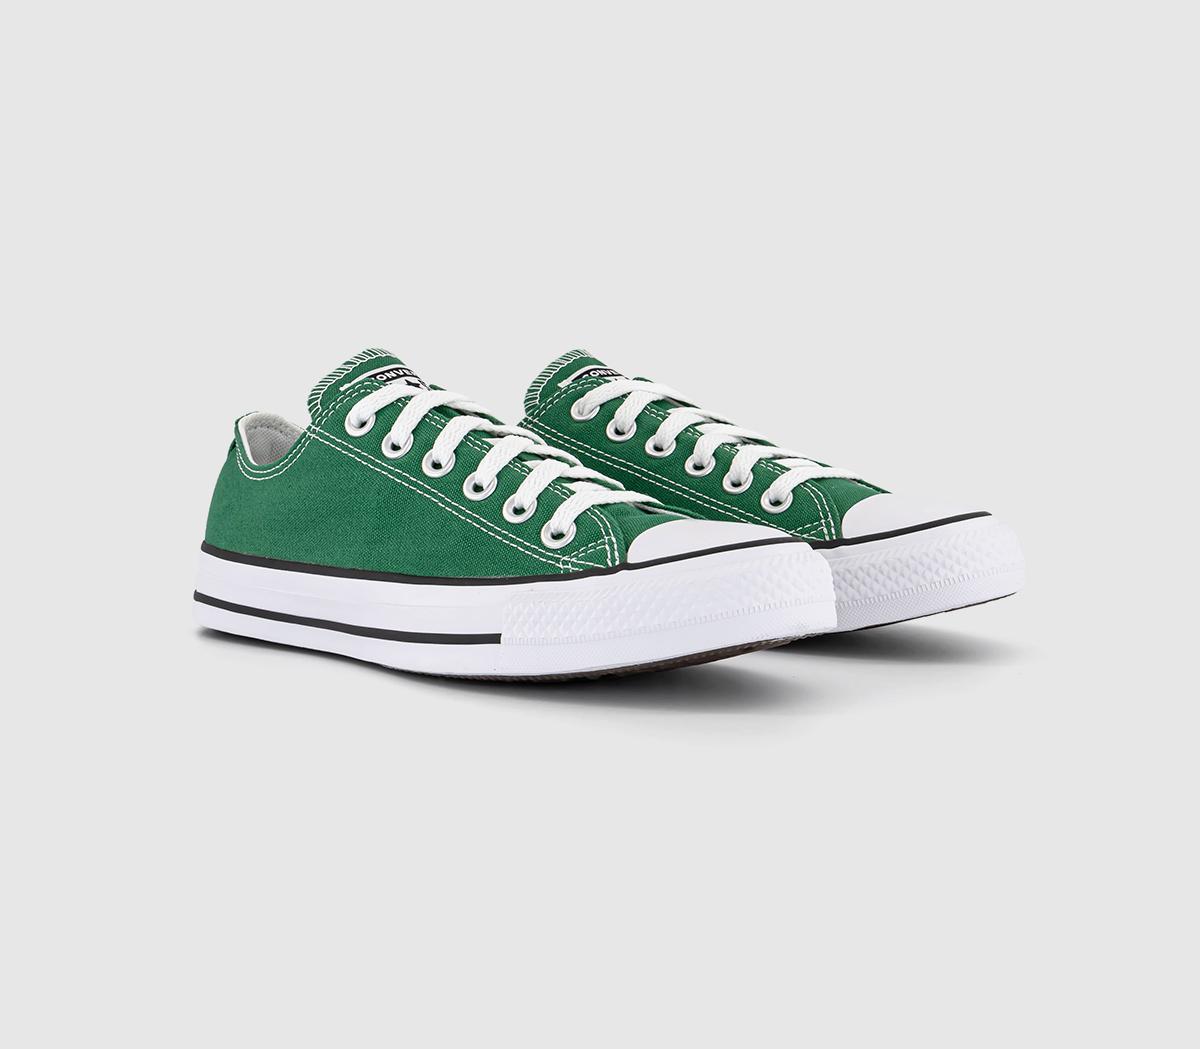 Converse All Star Low Trainers Amazon Green, 6